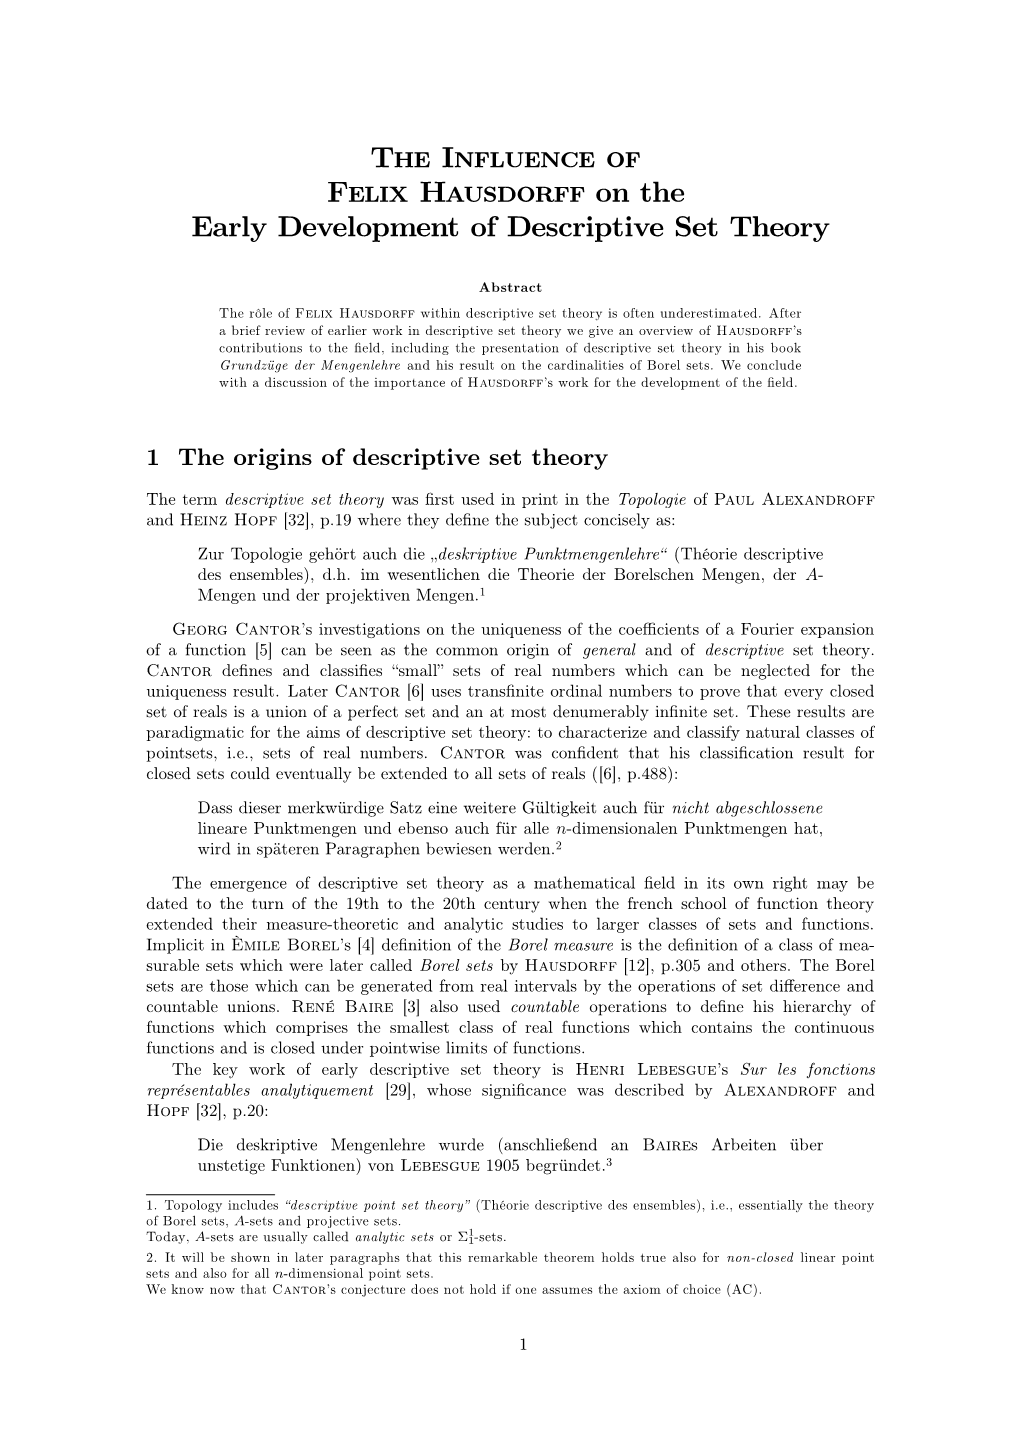 The Influence of Felix Hausdorff on the Early Development of Descriptive Set Theory